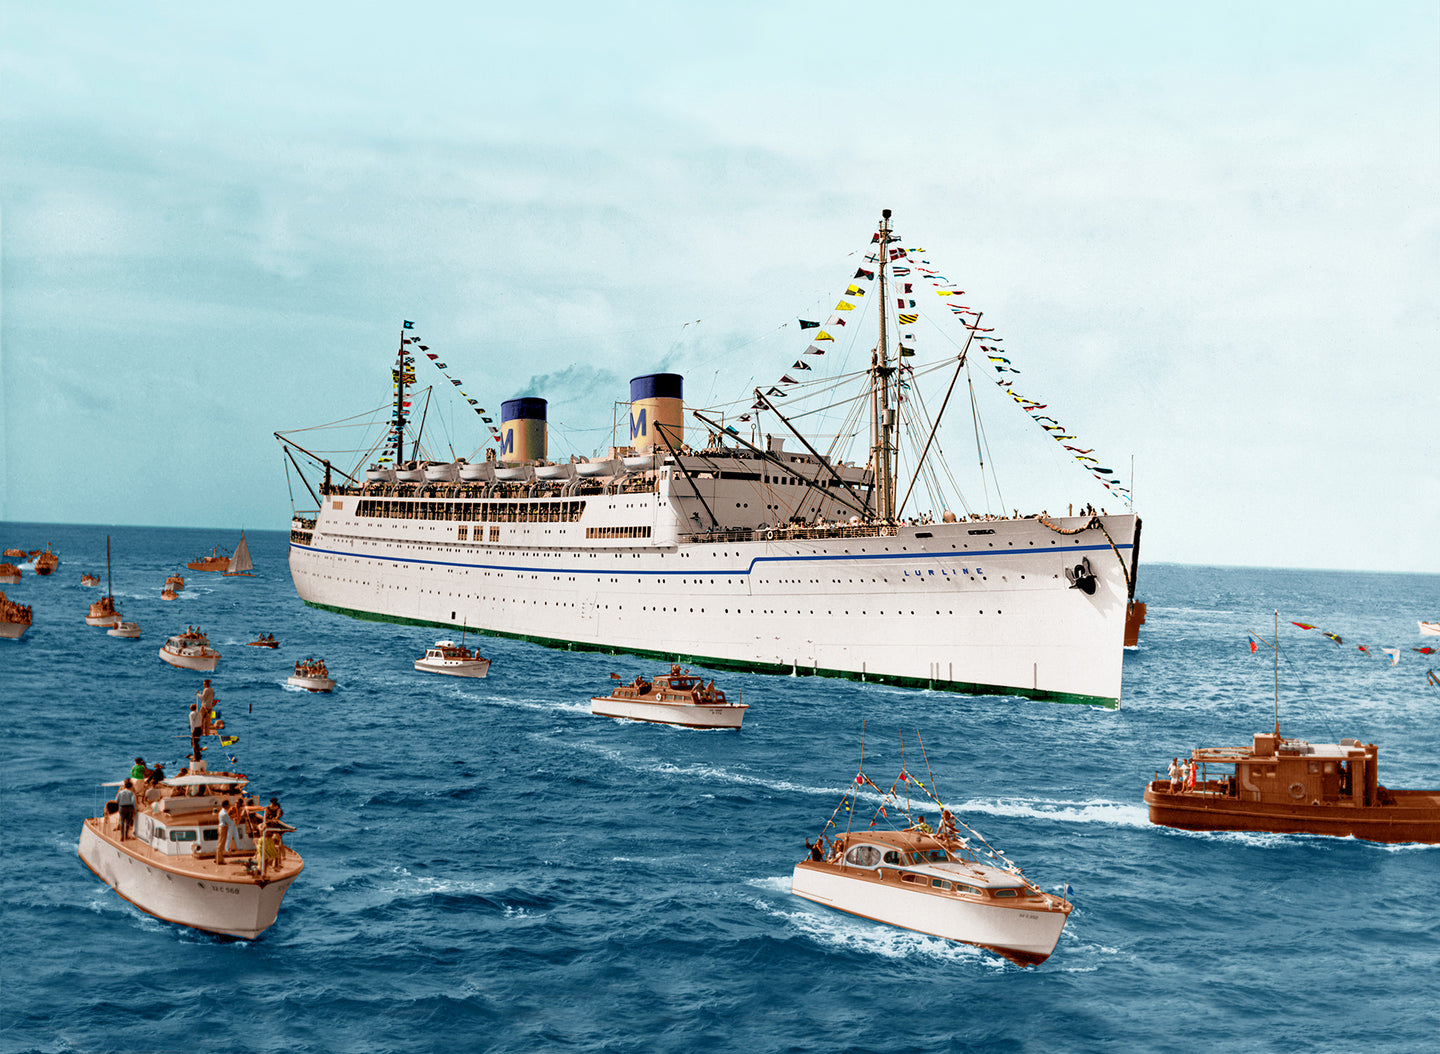 Color photograph of the Matson Line Lurline cruise ship being escorted by many smaller boats on a deep blue ocean and light blue sky background.